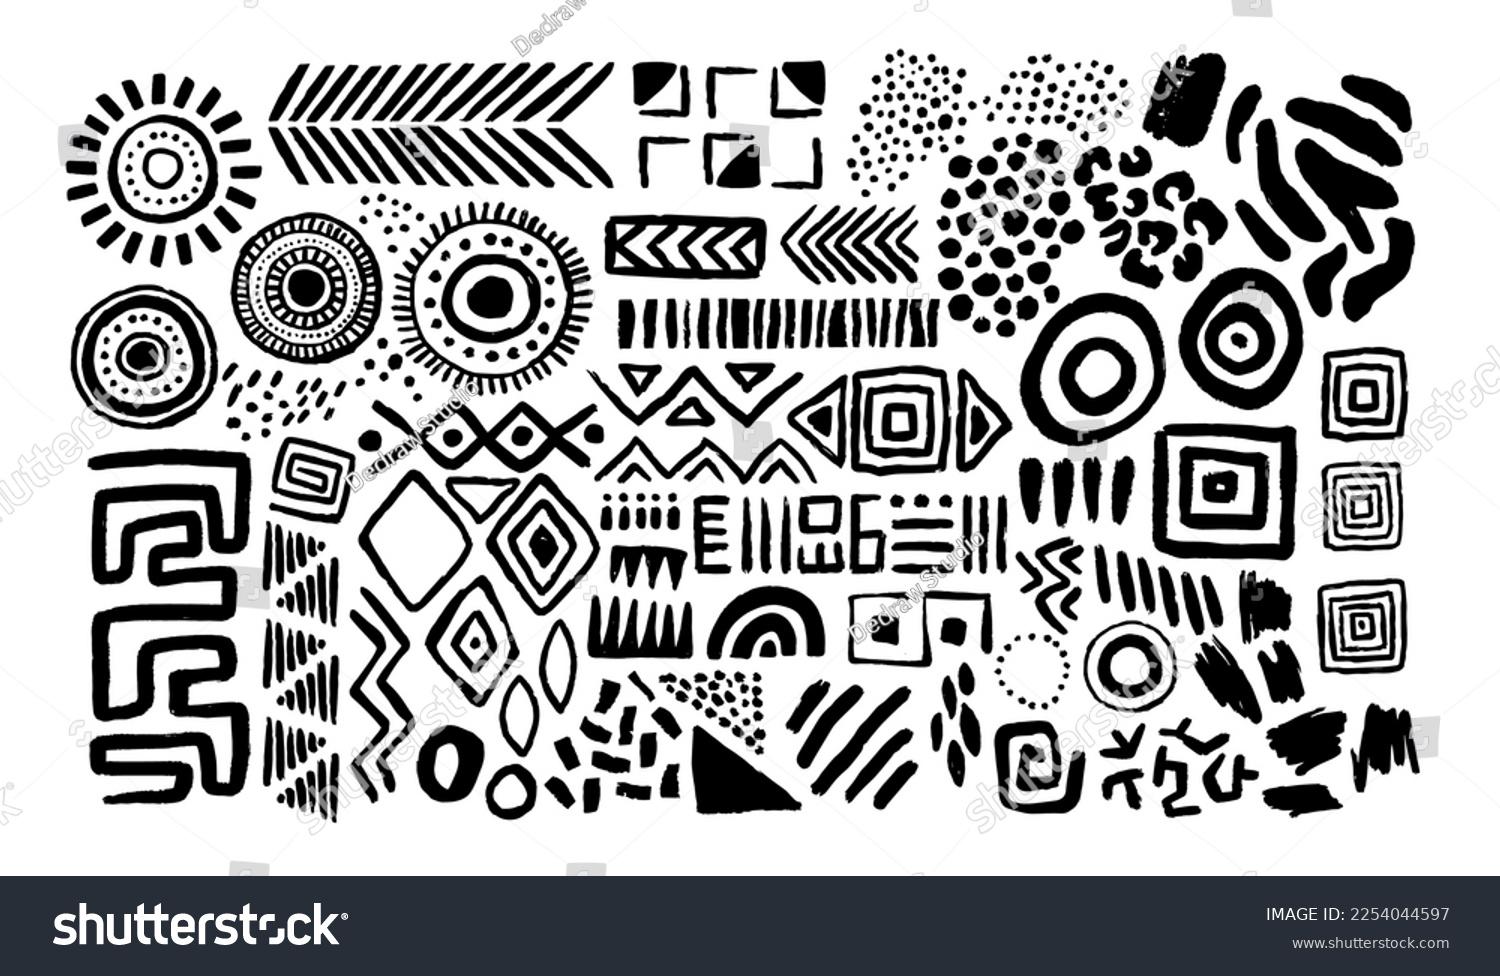 SVG of Abstract black and white african art shapes collection, tribal doodle decoration set. Random ethnic shapes, animal print texture and traditional hand drawn icons. svg